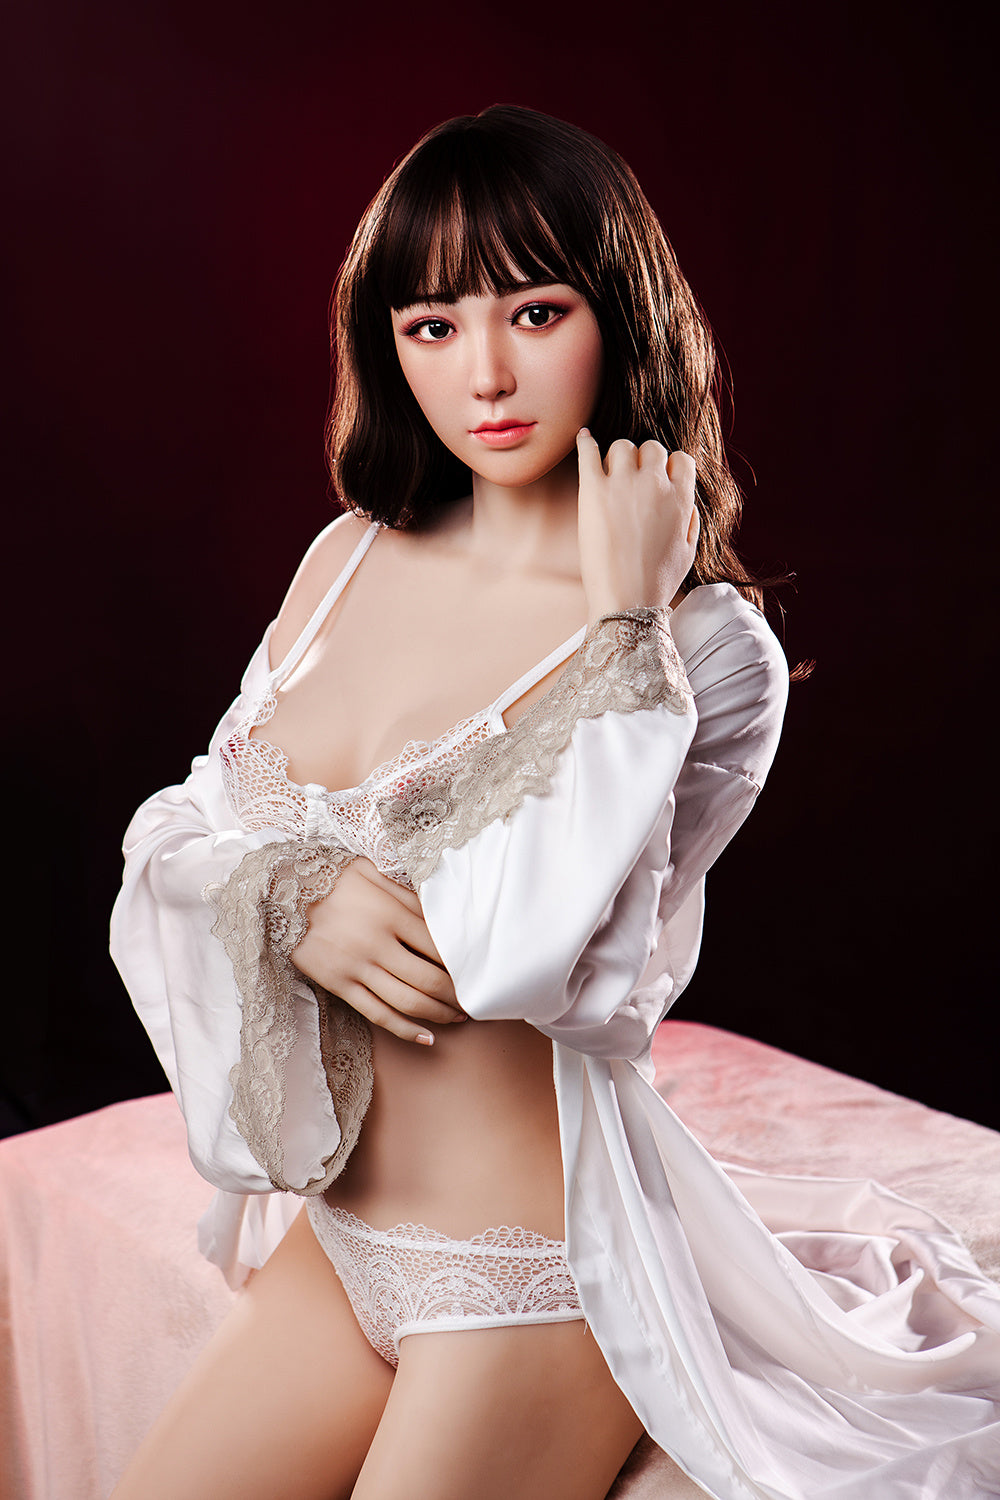 XYDOLL 158cm RZC013 Lifesize silicone sex doll for men buy real love dolls ready to ship sex doll riding sex doll